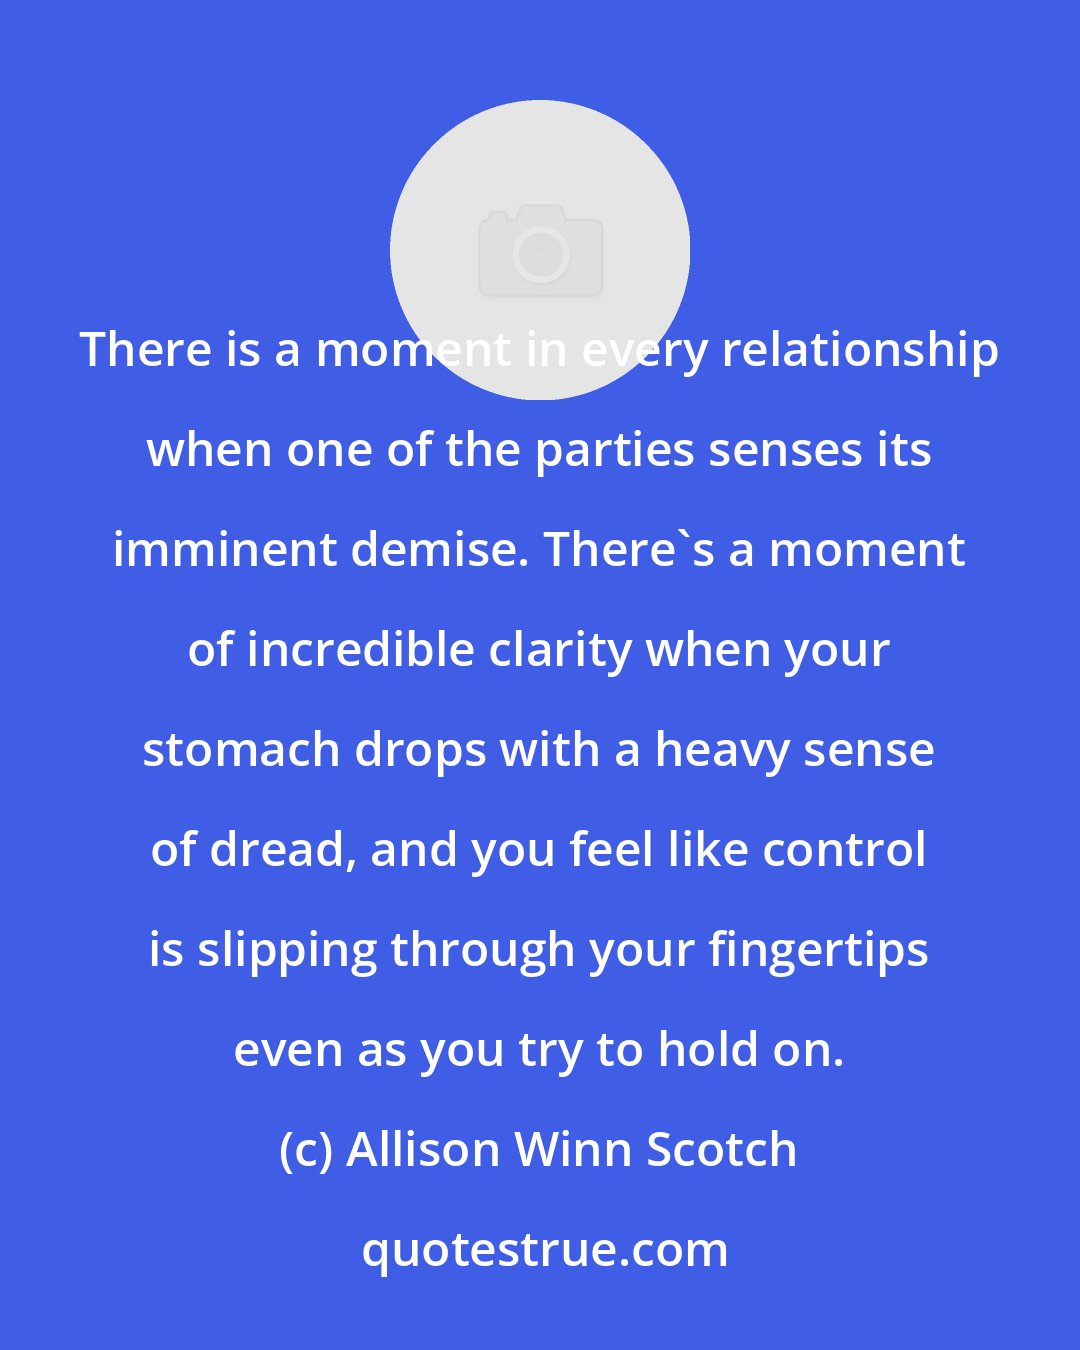 Allison Winn Scotch: There is a moment in every relationship when one of the parties senses its imminent demise. There's a moment of incredible clarity when your stomach drops with a heavy sense of dread, and you feel like control is slipping through your fingertips even as you try to hold on.